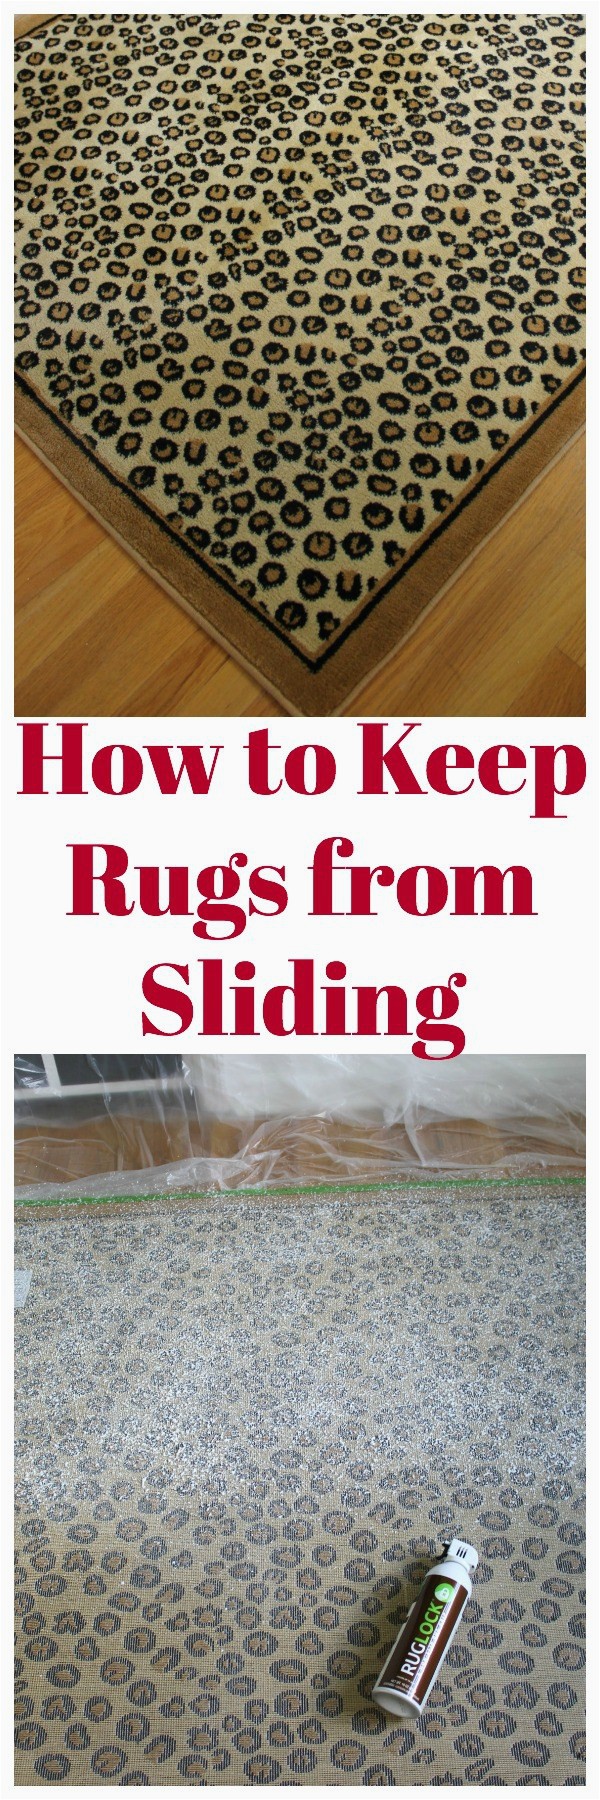 Stop area Rug From Sliding How to Keep Rugs From Sliding On Hardwood Floors and Other